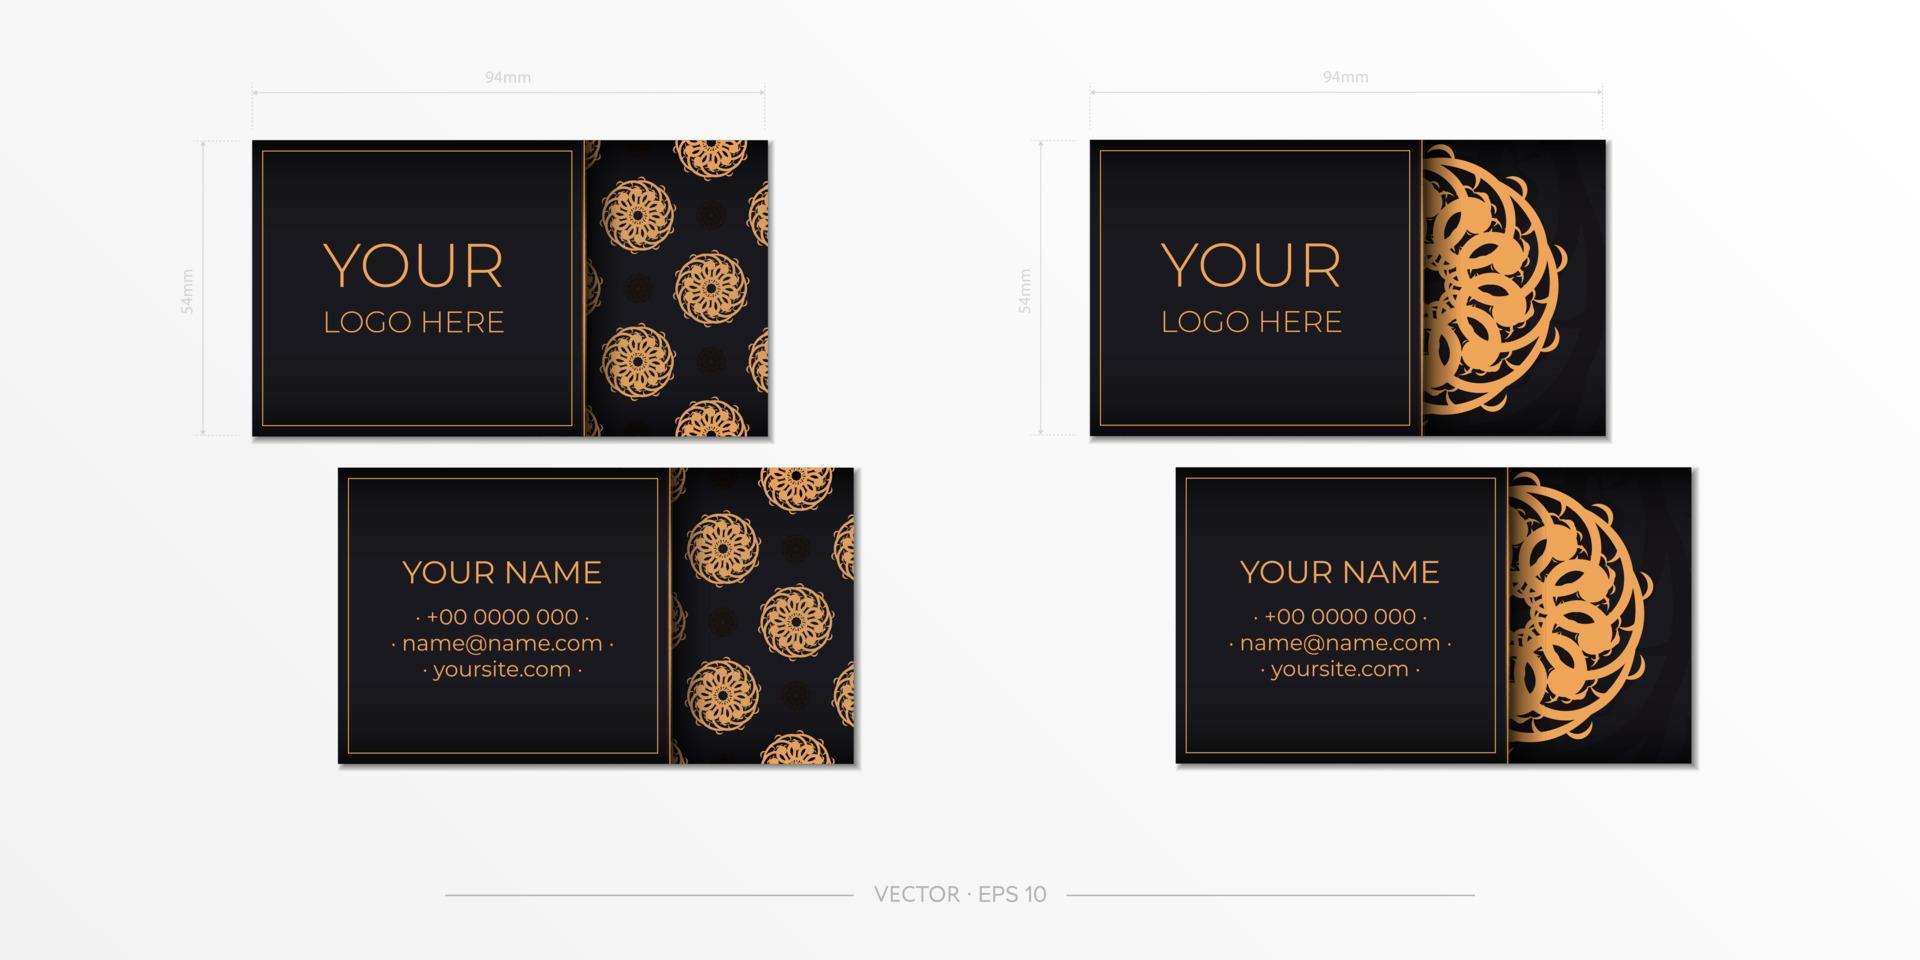 Black luxury business cards with decorative ornaments business cards, oriental pattern, illustration. Ready to print, meet the requirements of the printing house. vector